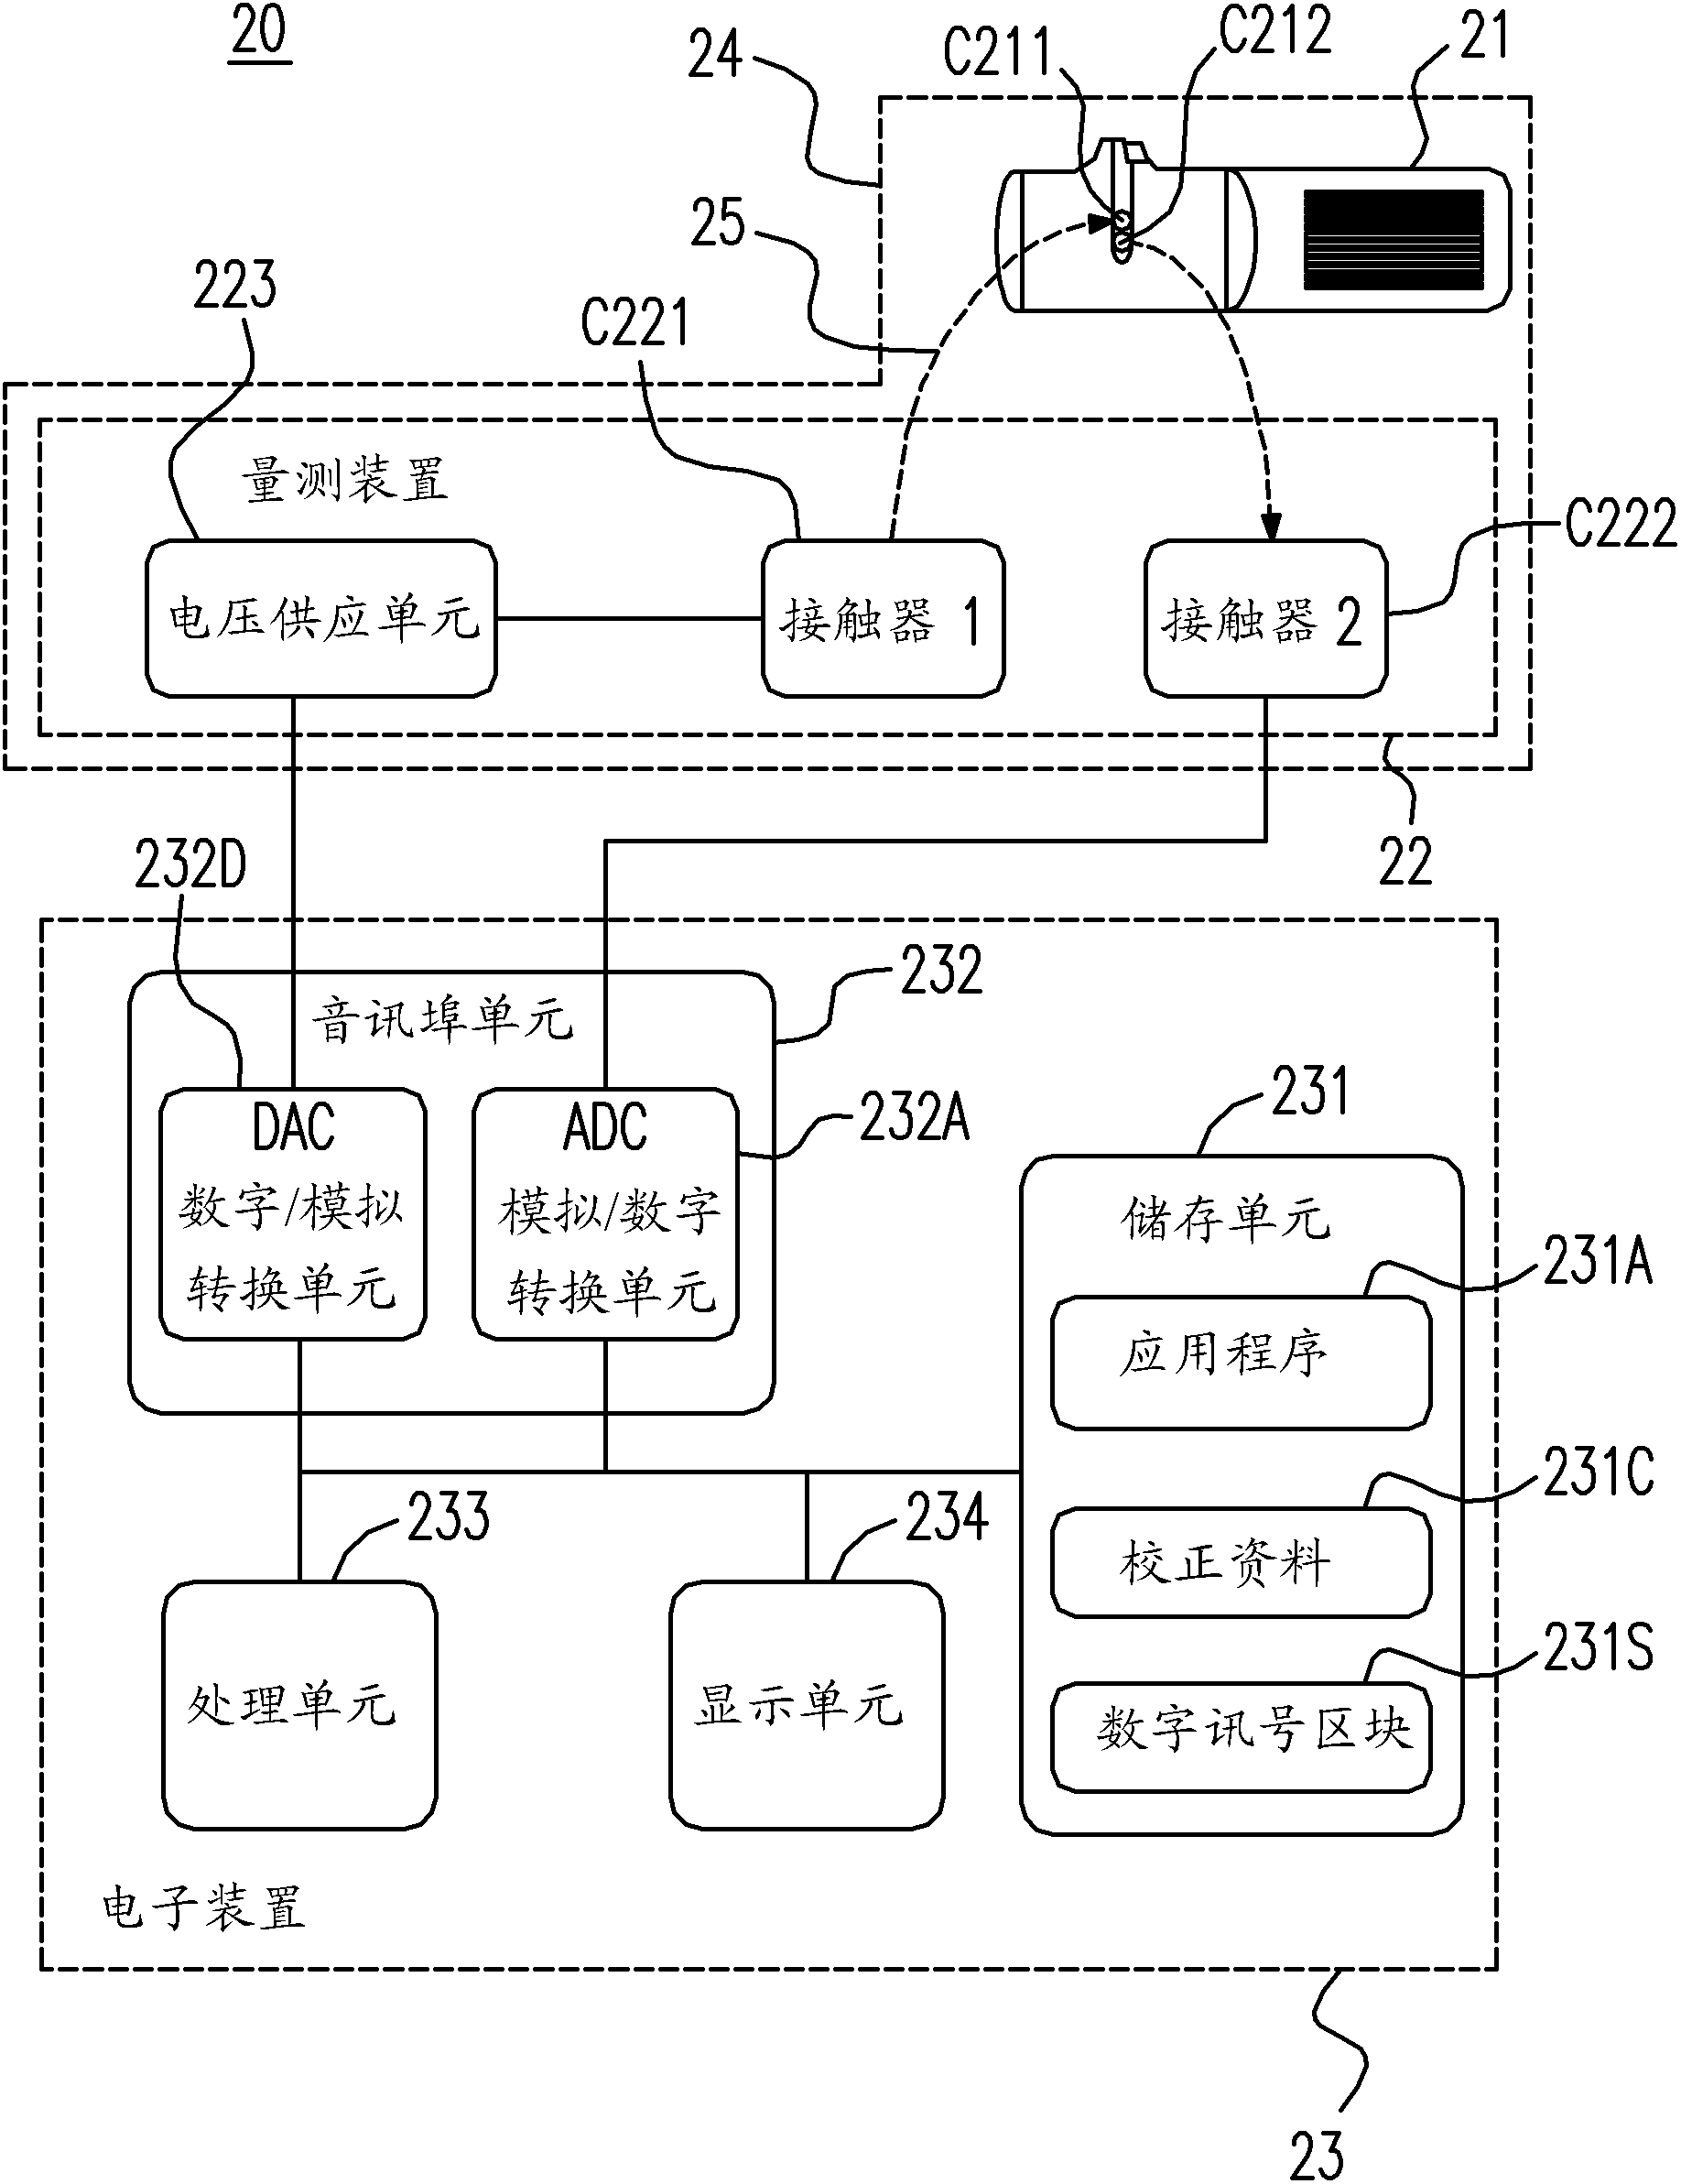 System and method for measuring physiological parameter